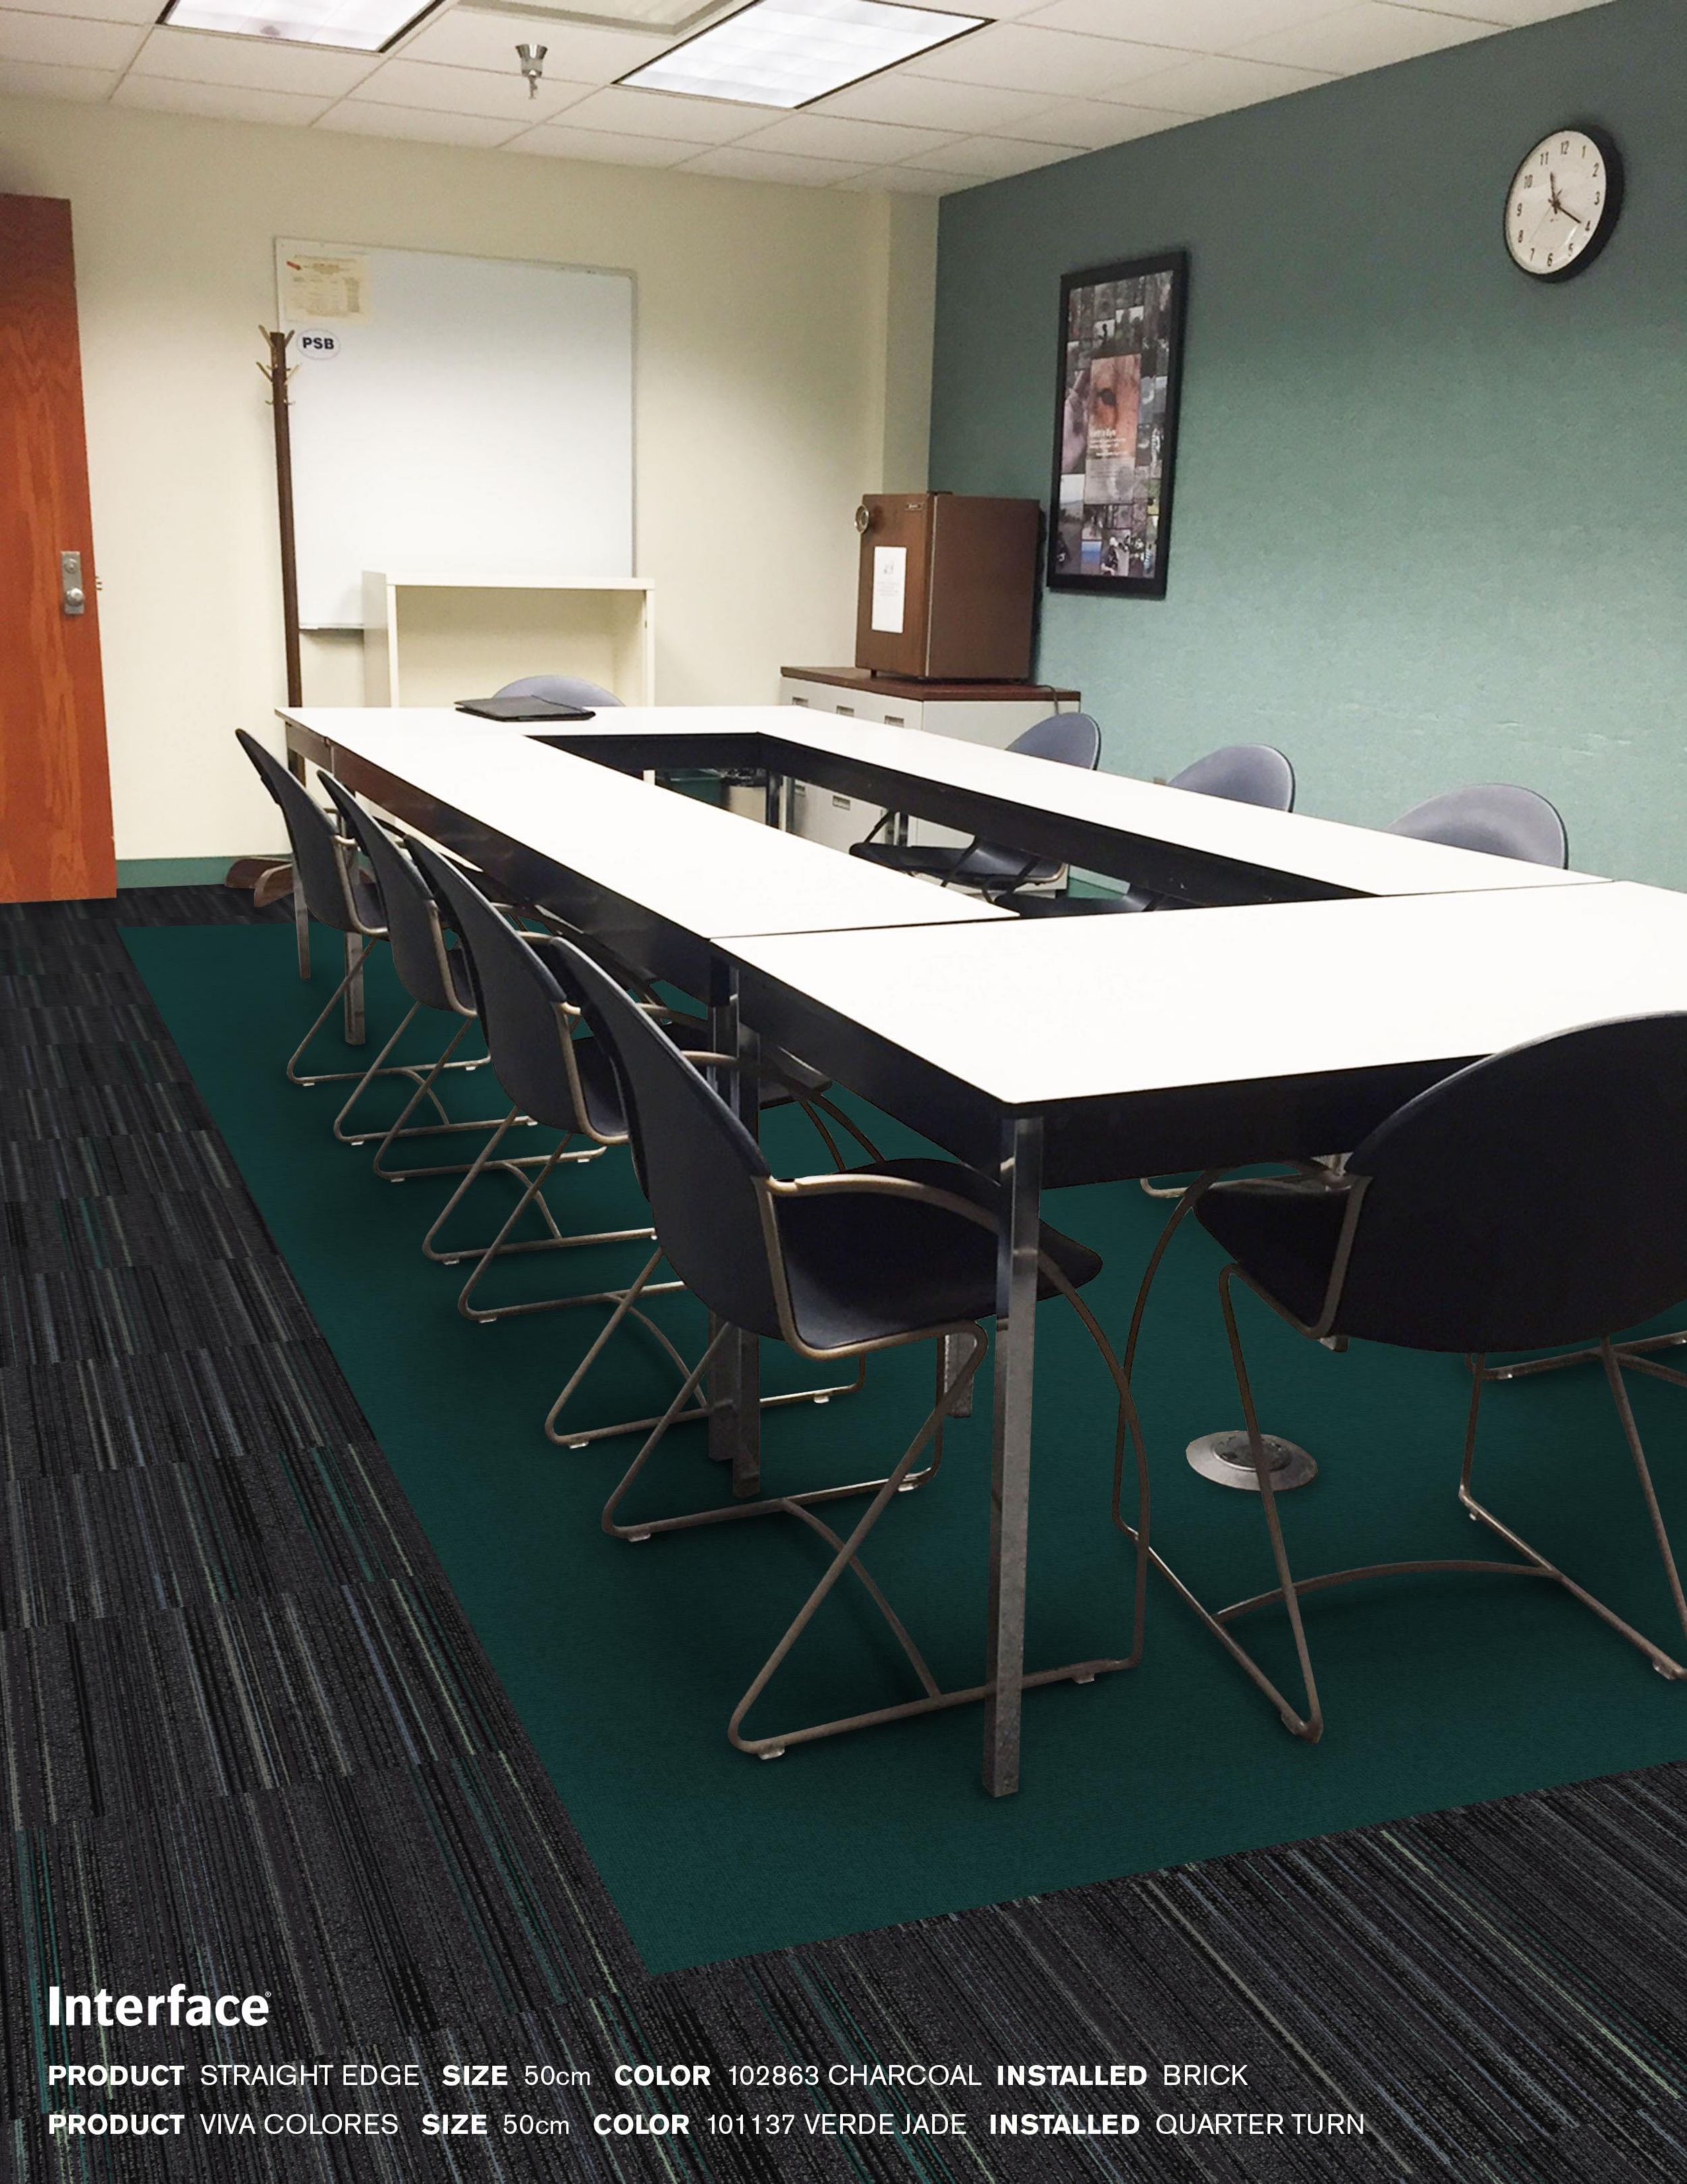 Interface Straight Edge and Viva Colores carpet tile in meeting room with rectangular conerence table and chairs numéro d’image 2